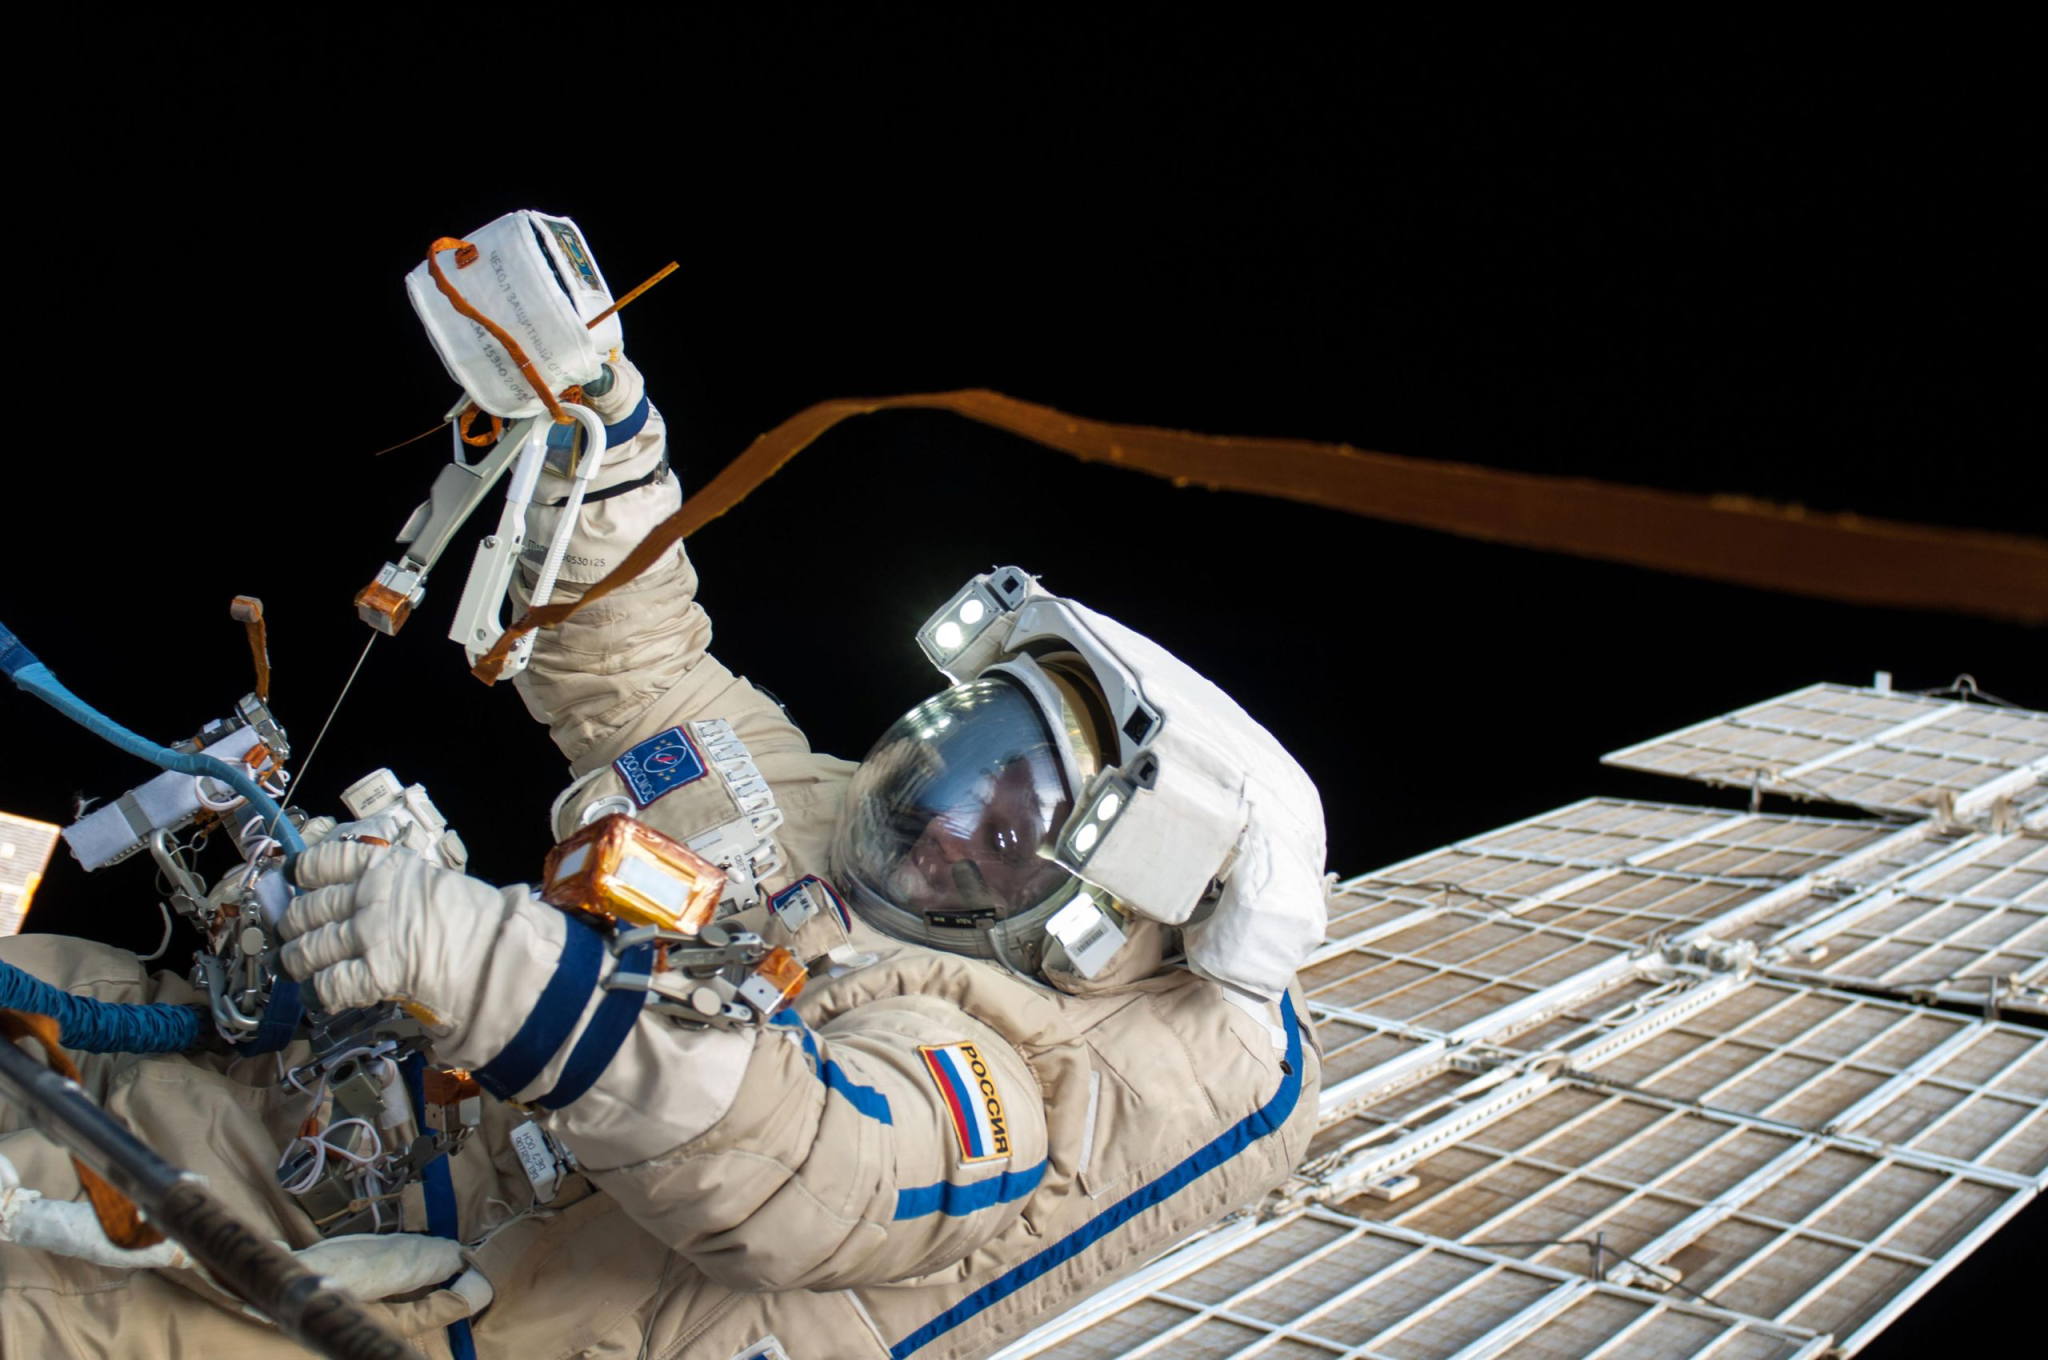 image of a cosmonaut during a spacewalk